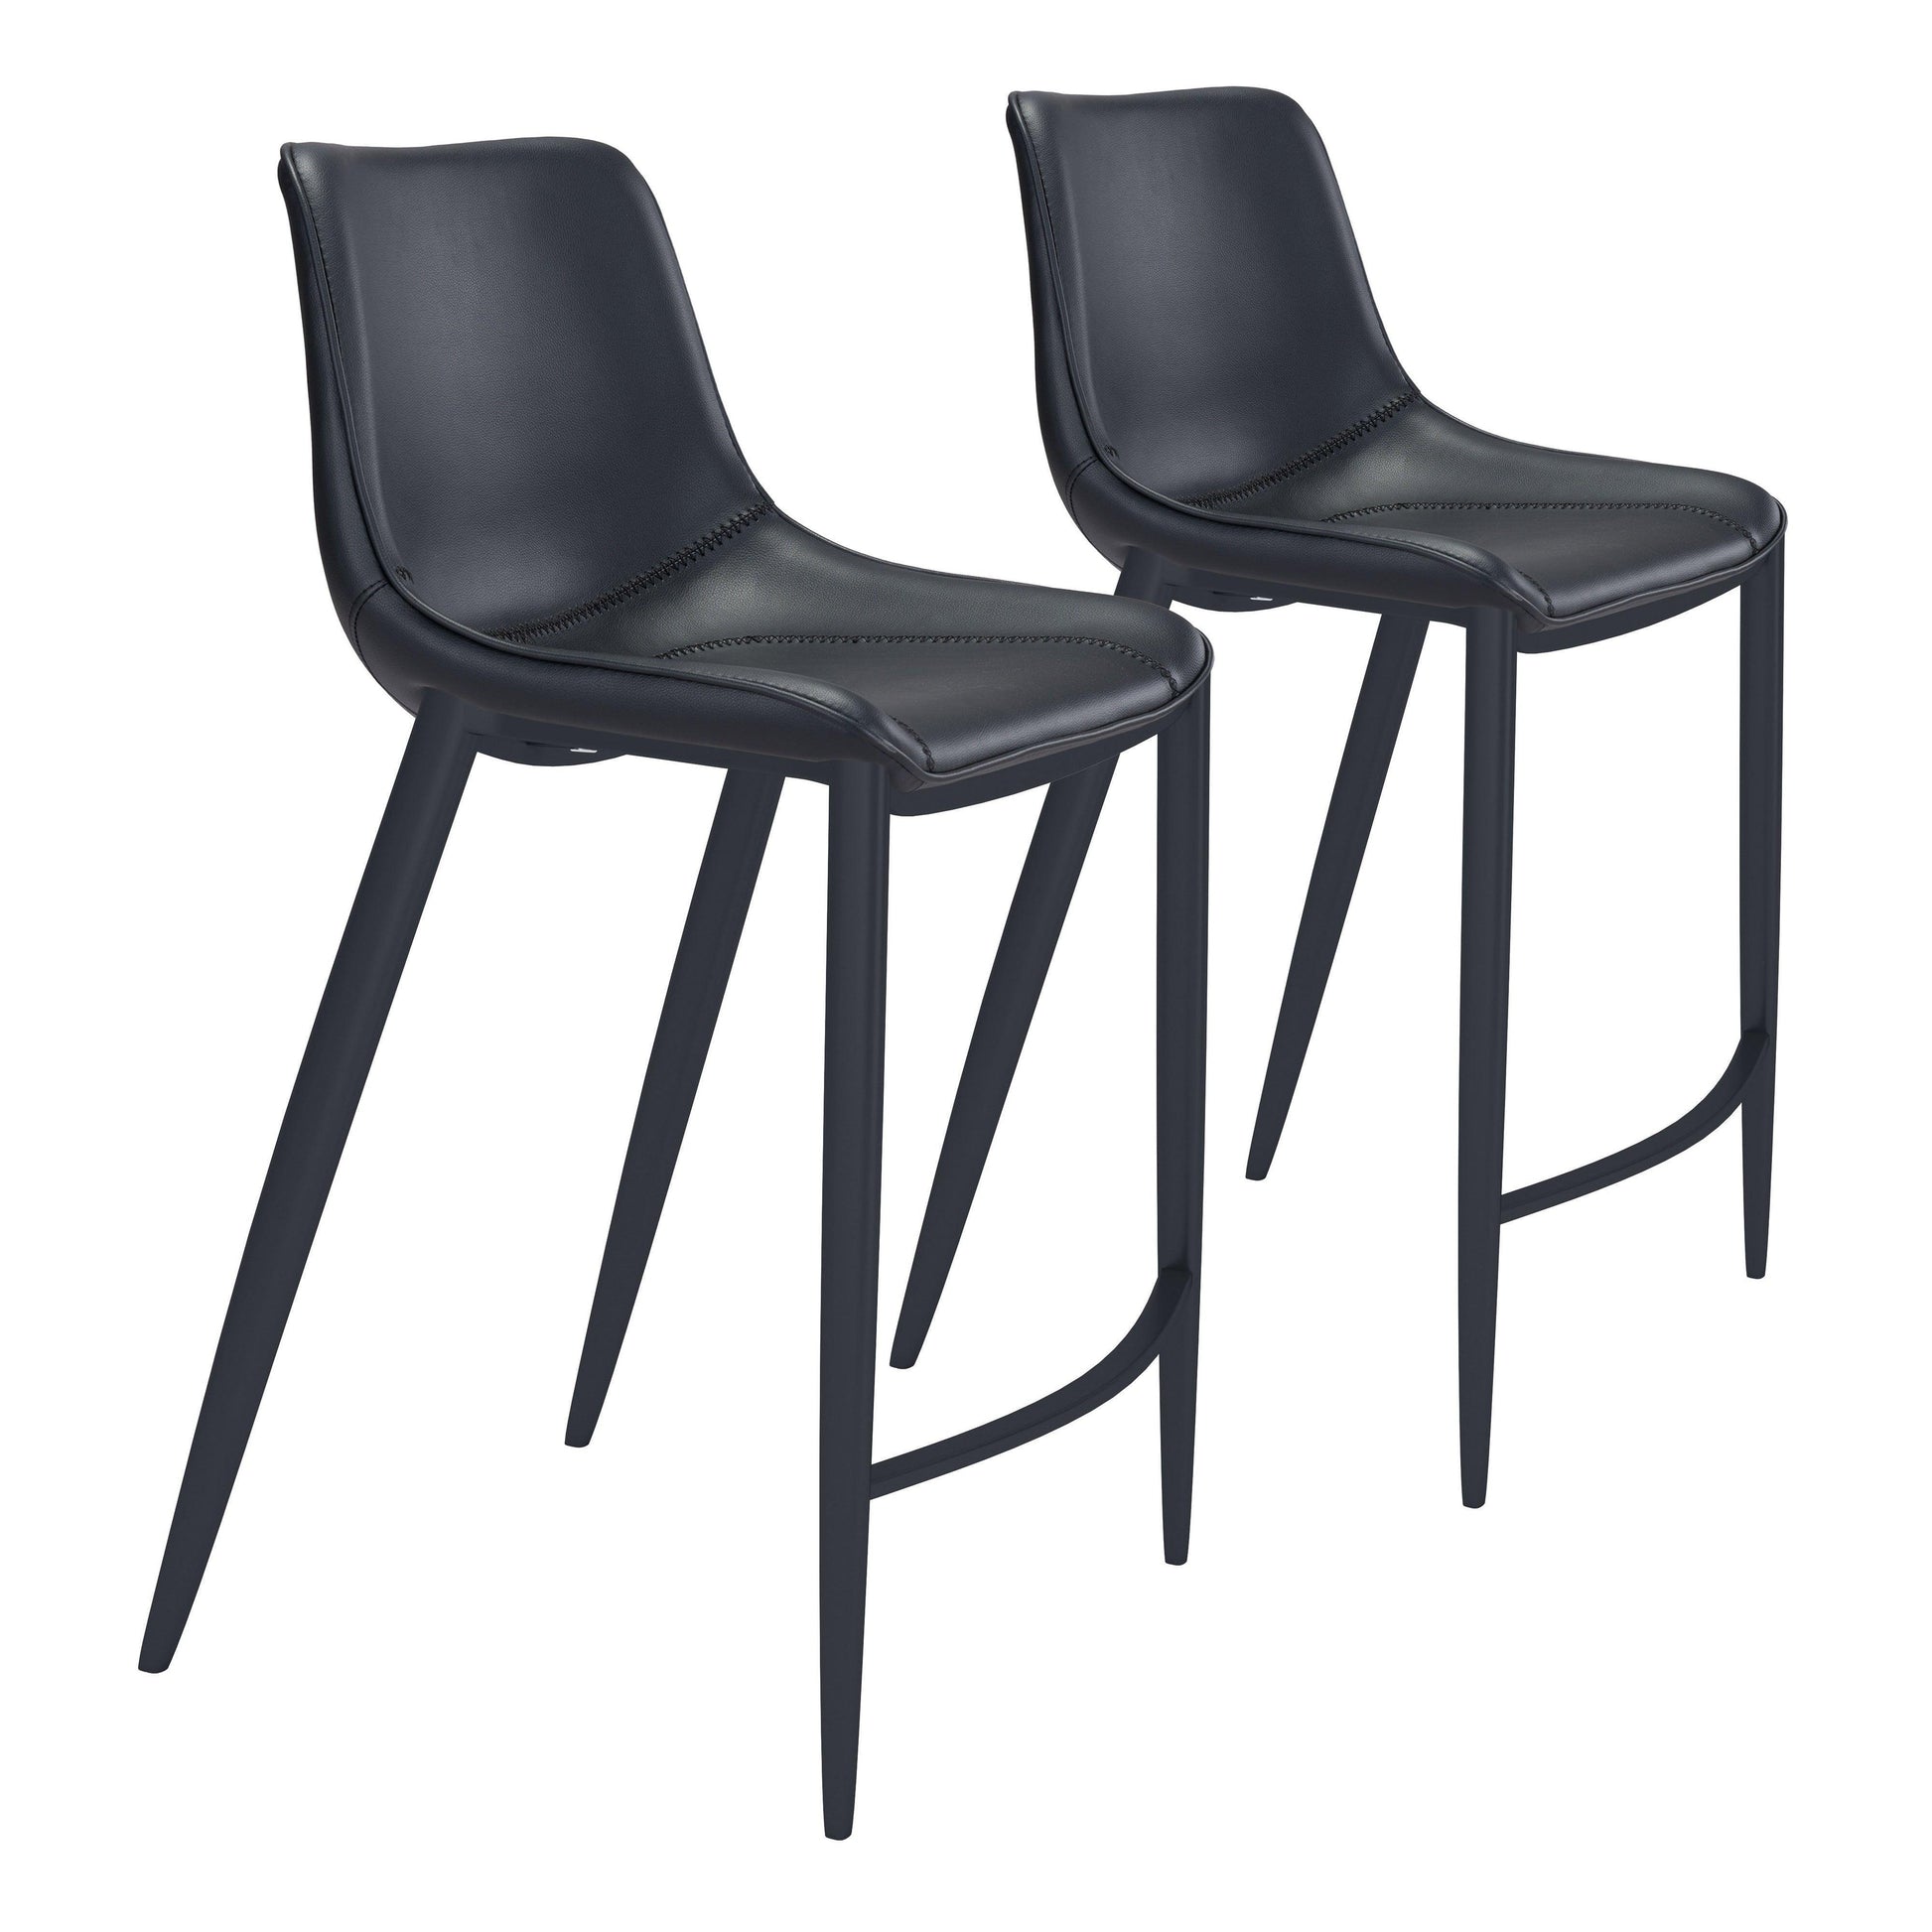 Magnus Bar Chair (Set of 2) Black - Sideboards and Things Accents_Black, Back Type_Full Back, Back Type_With Back, Brand_Zuo Modern, Color_Black, Depth_20-30, Finish_Powder Coated, Height_40-50, Materials_Metal, Materials_Upholstery, Metal Type_Steel, Number of Pieces_2PC Set, Product Type_Bar Height, Shape_Armless, Upholstery Type_Fabric Blend, Upholstery Type_Leather, Upholstery Type_Polyester, Upholstery Type_Vegan Leather, Width_20-30